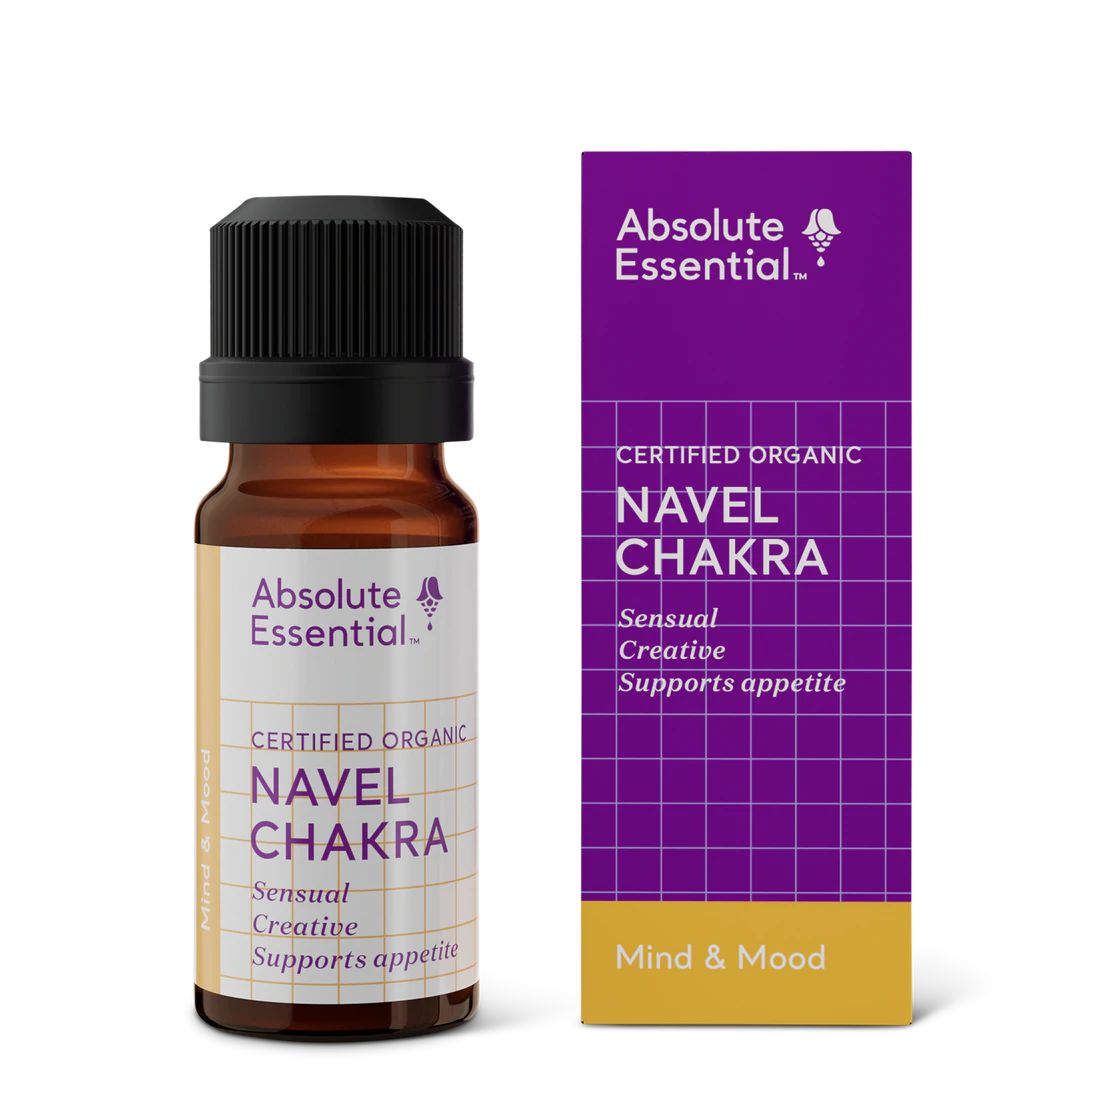 Absolute Essential Navel Chakra